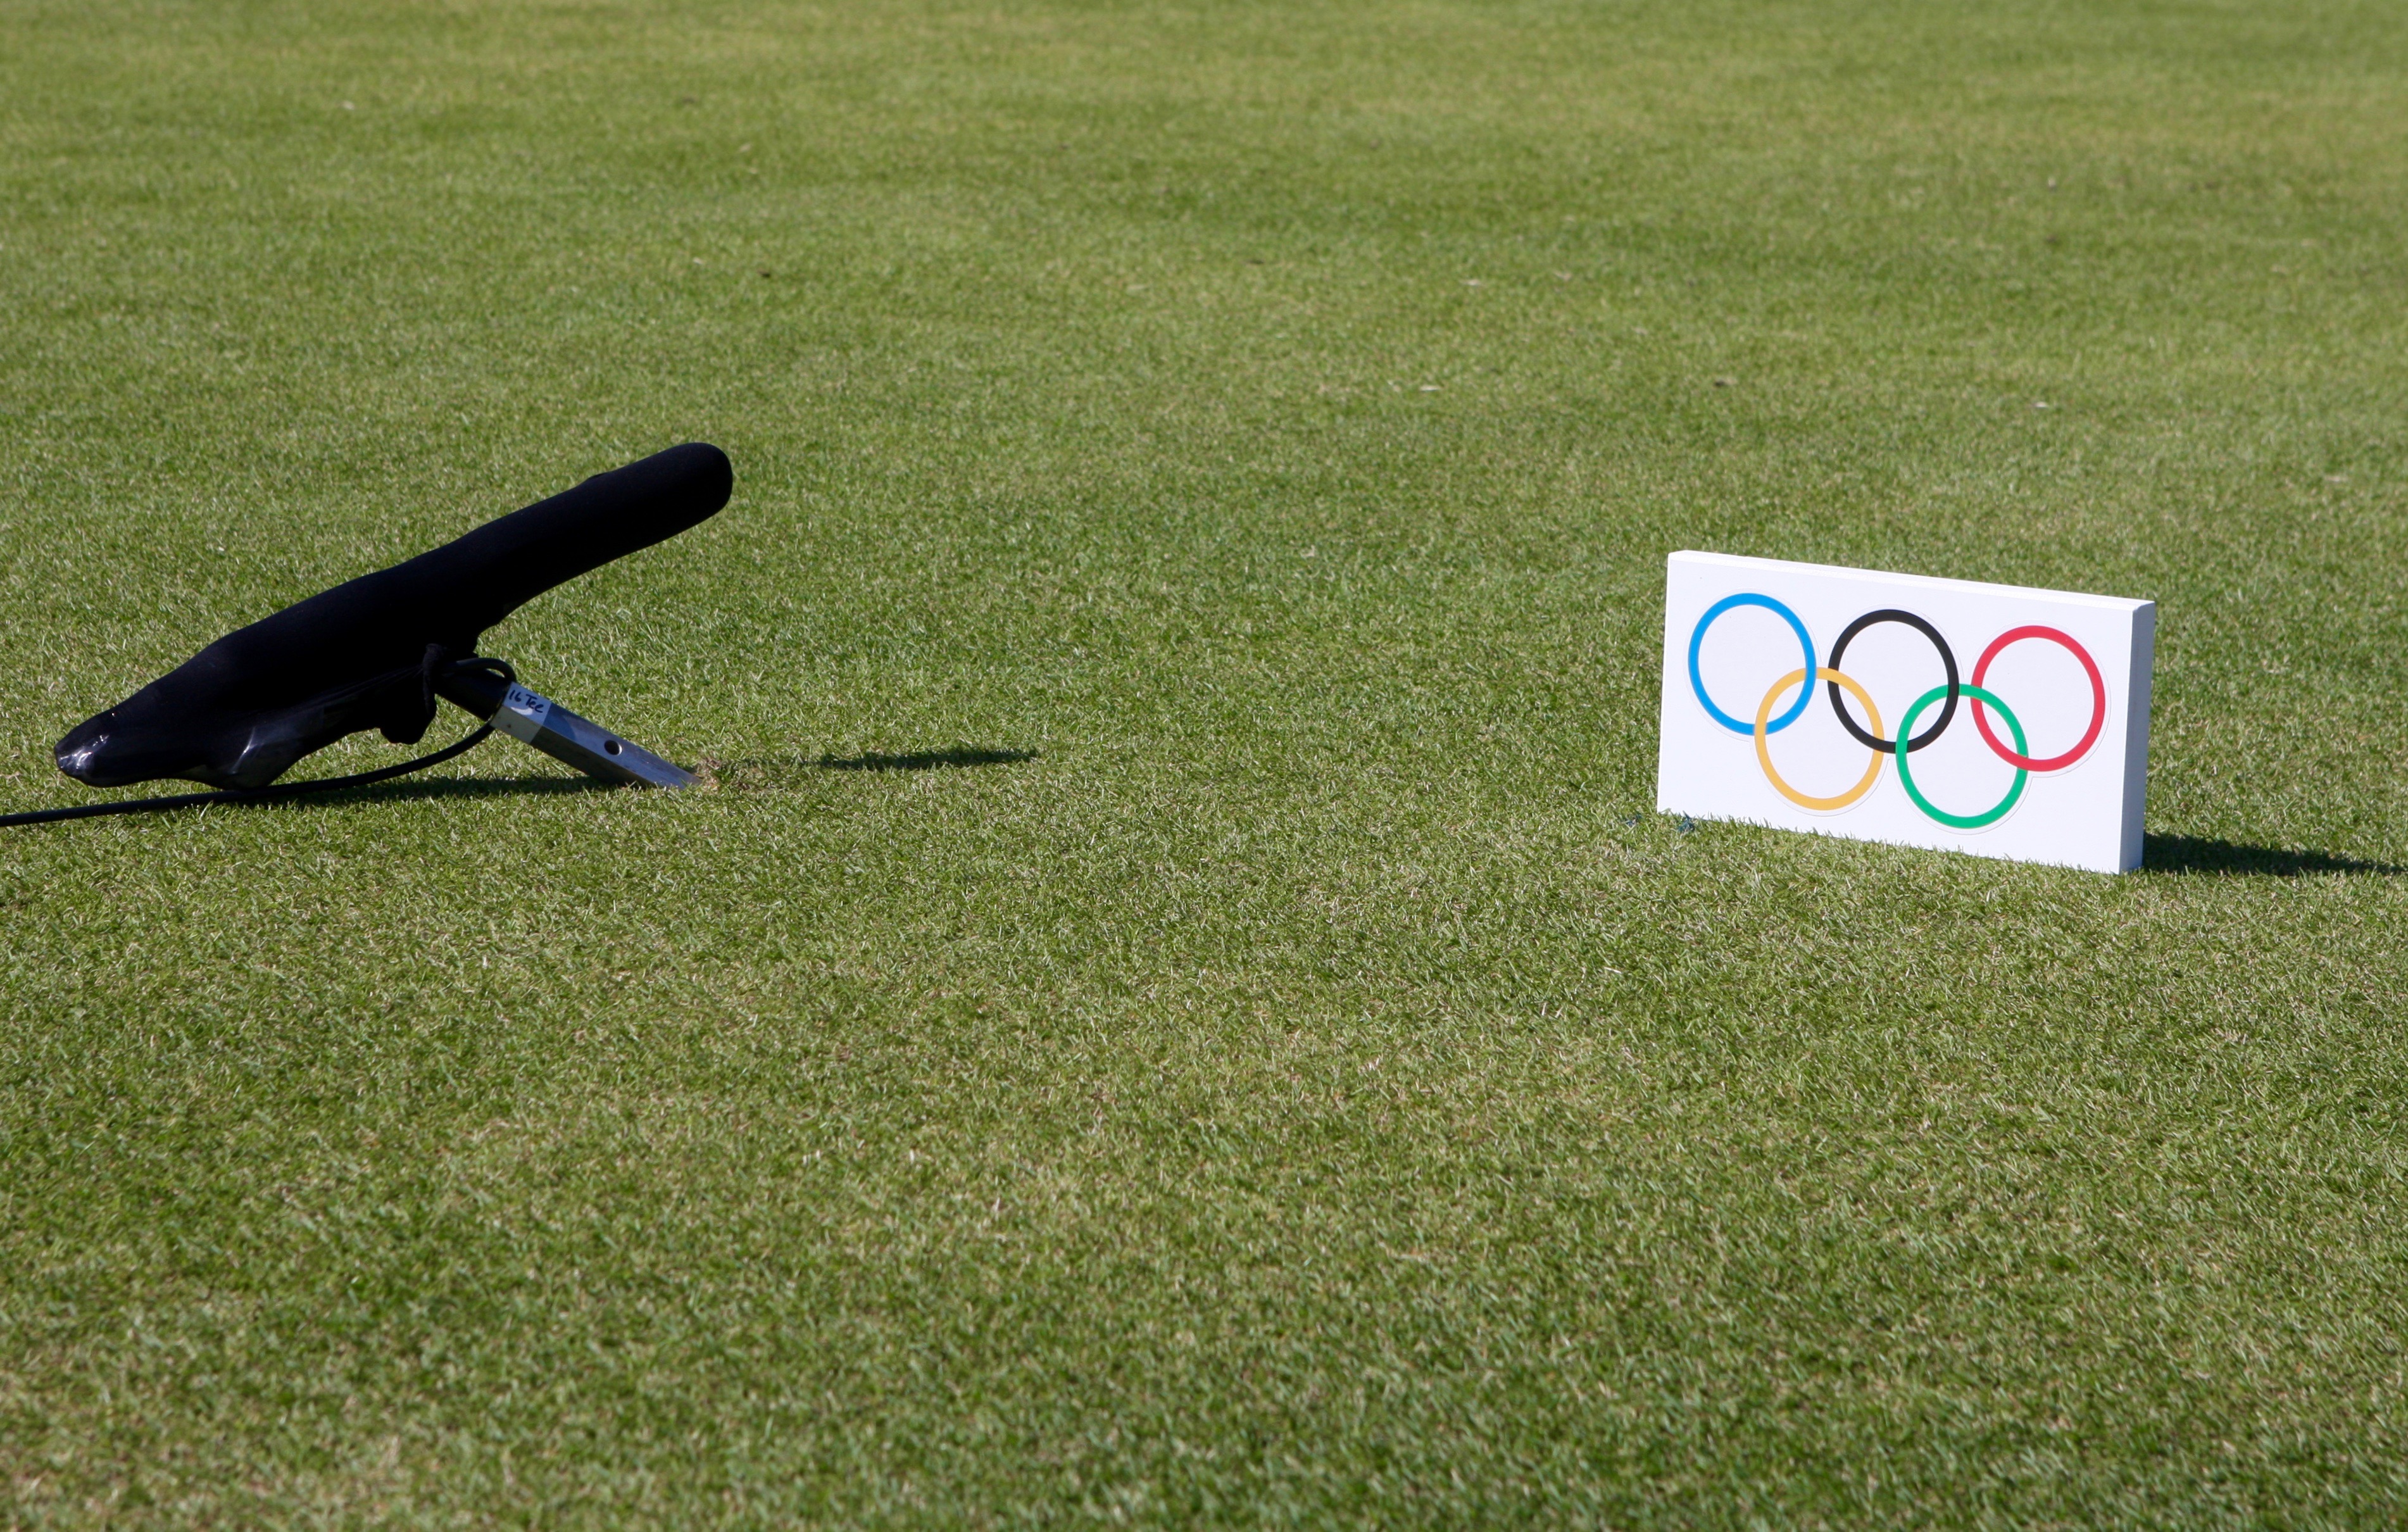 Tee box mics are all over the course to capture the sounds of golf's return to the Olympics.